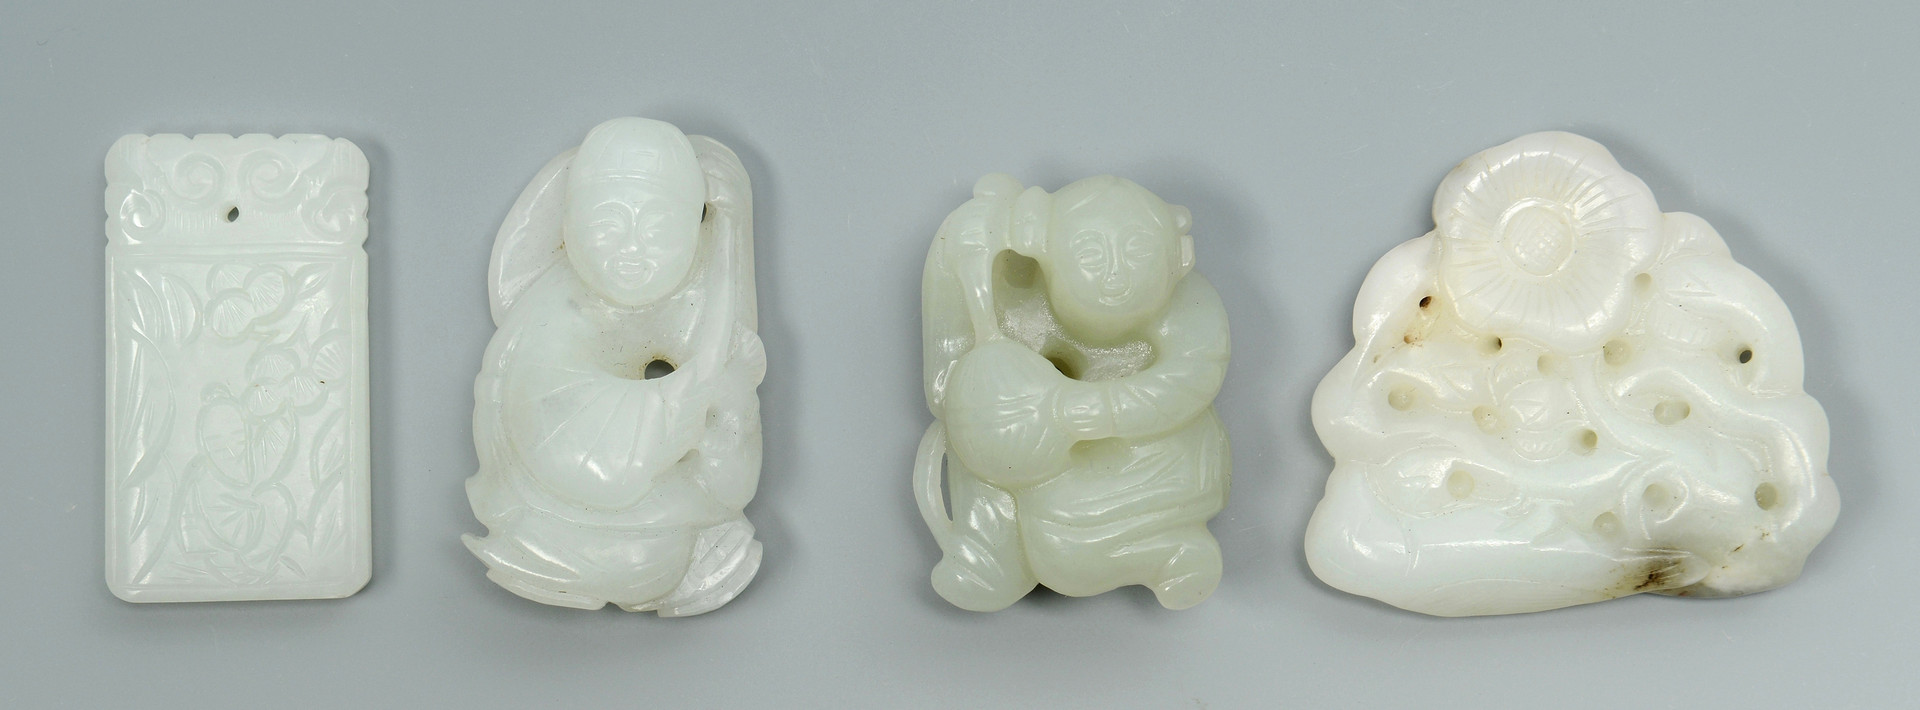 Lot 15: 4 Chinese Carved Jade Articles